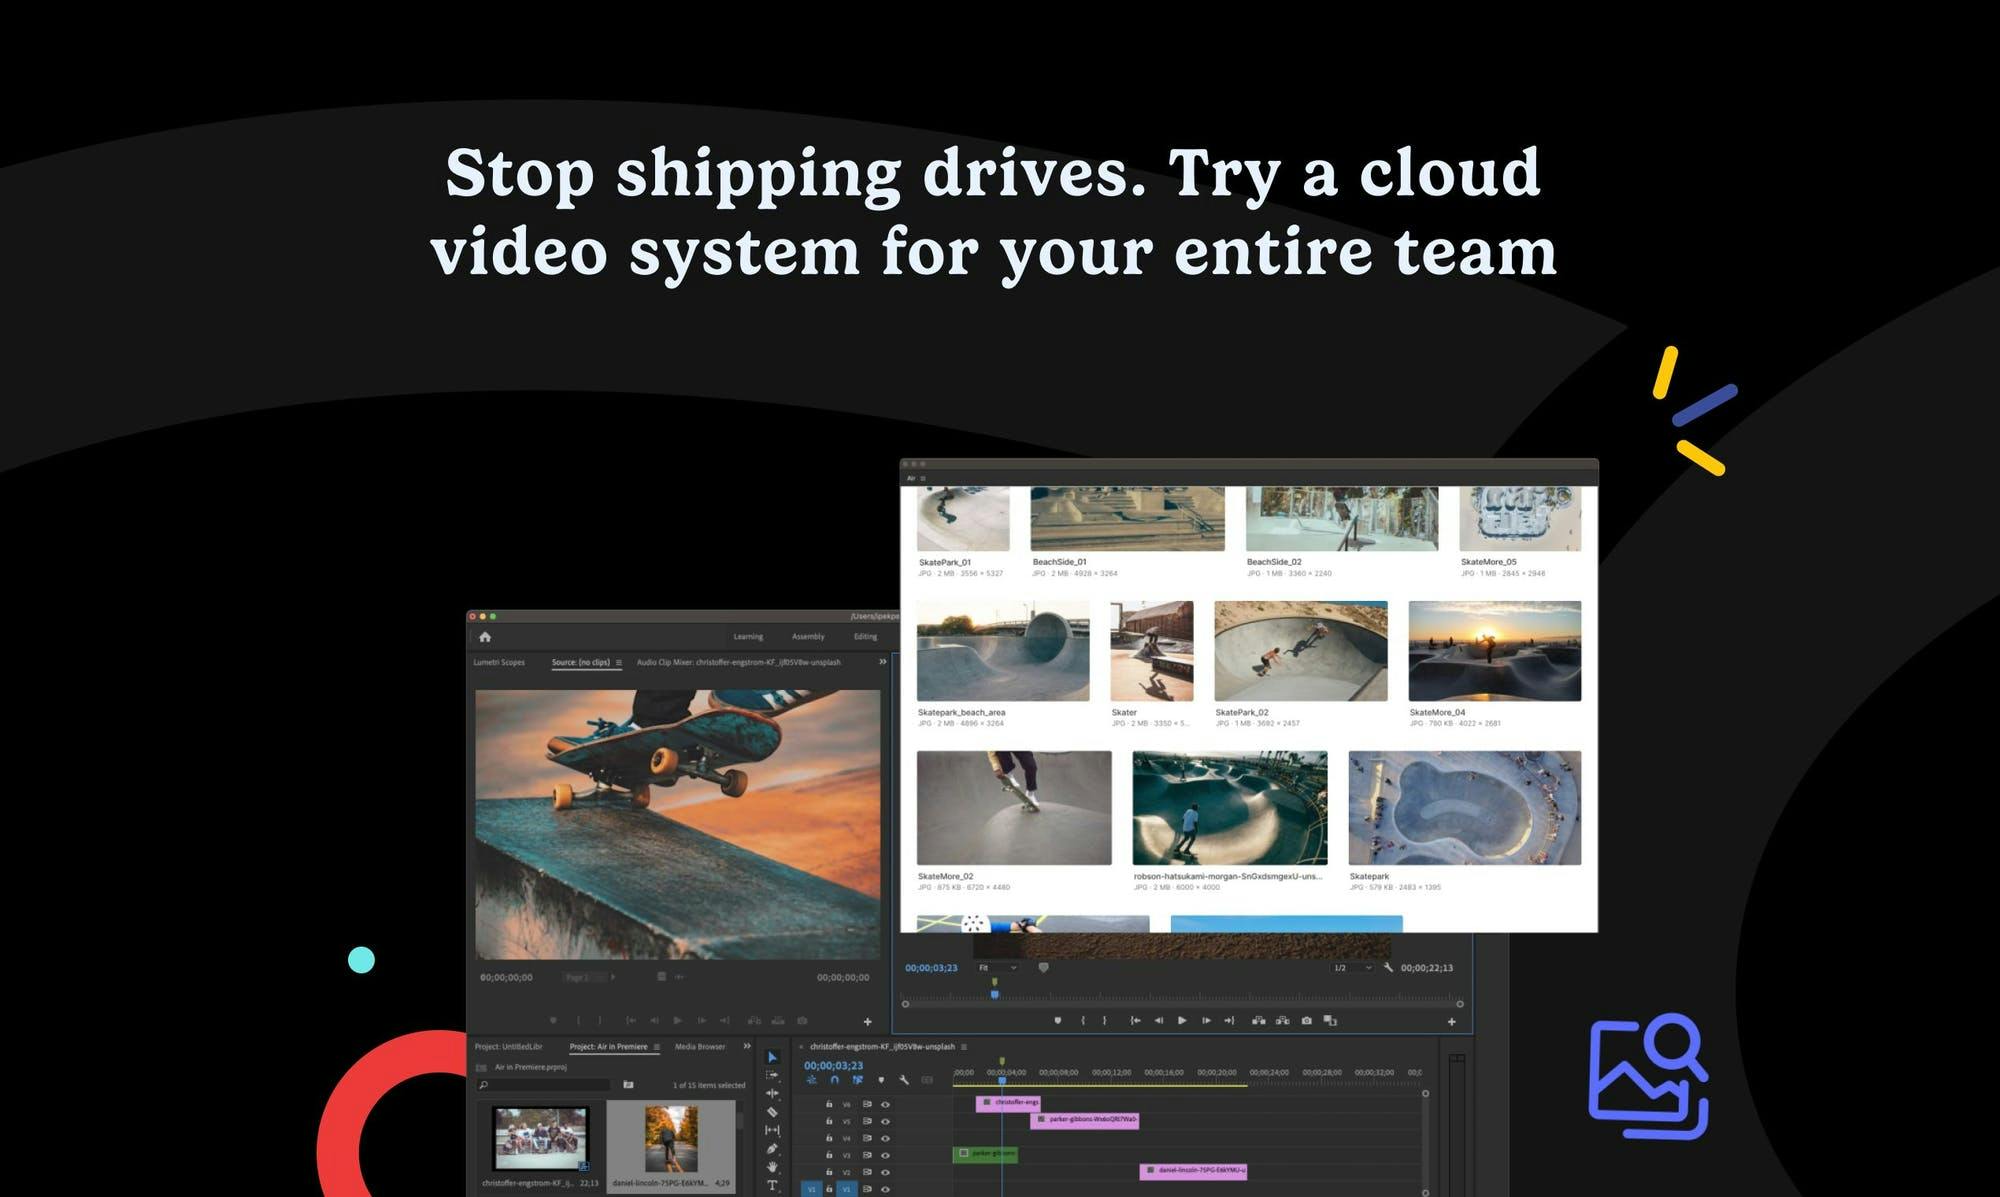 Stop shipping drives. Try a cloud video system for your entire team